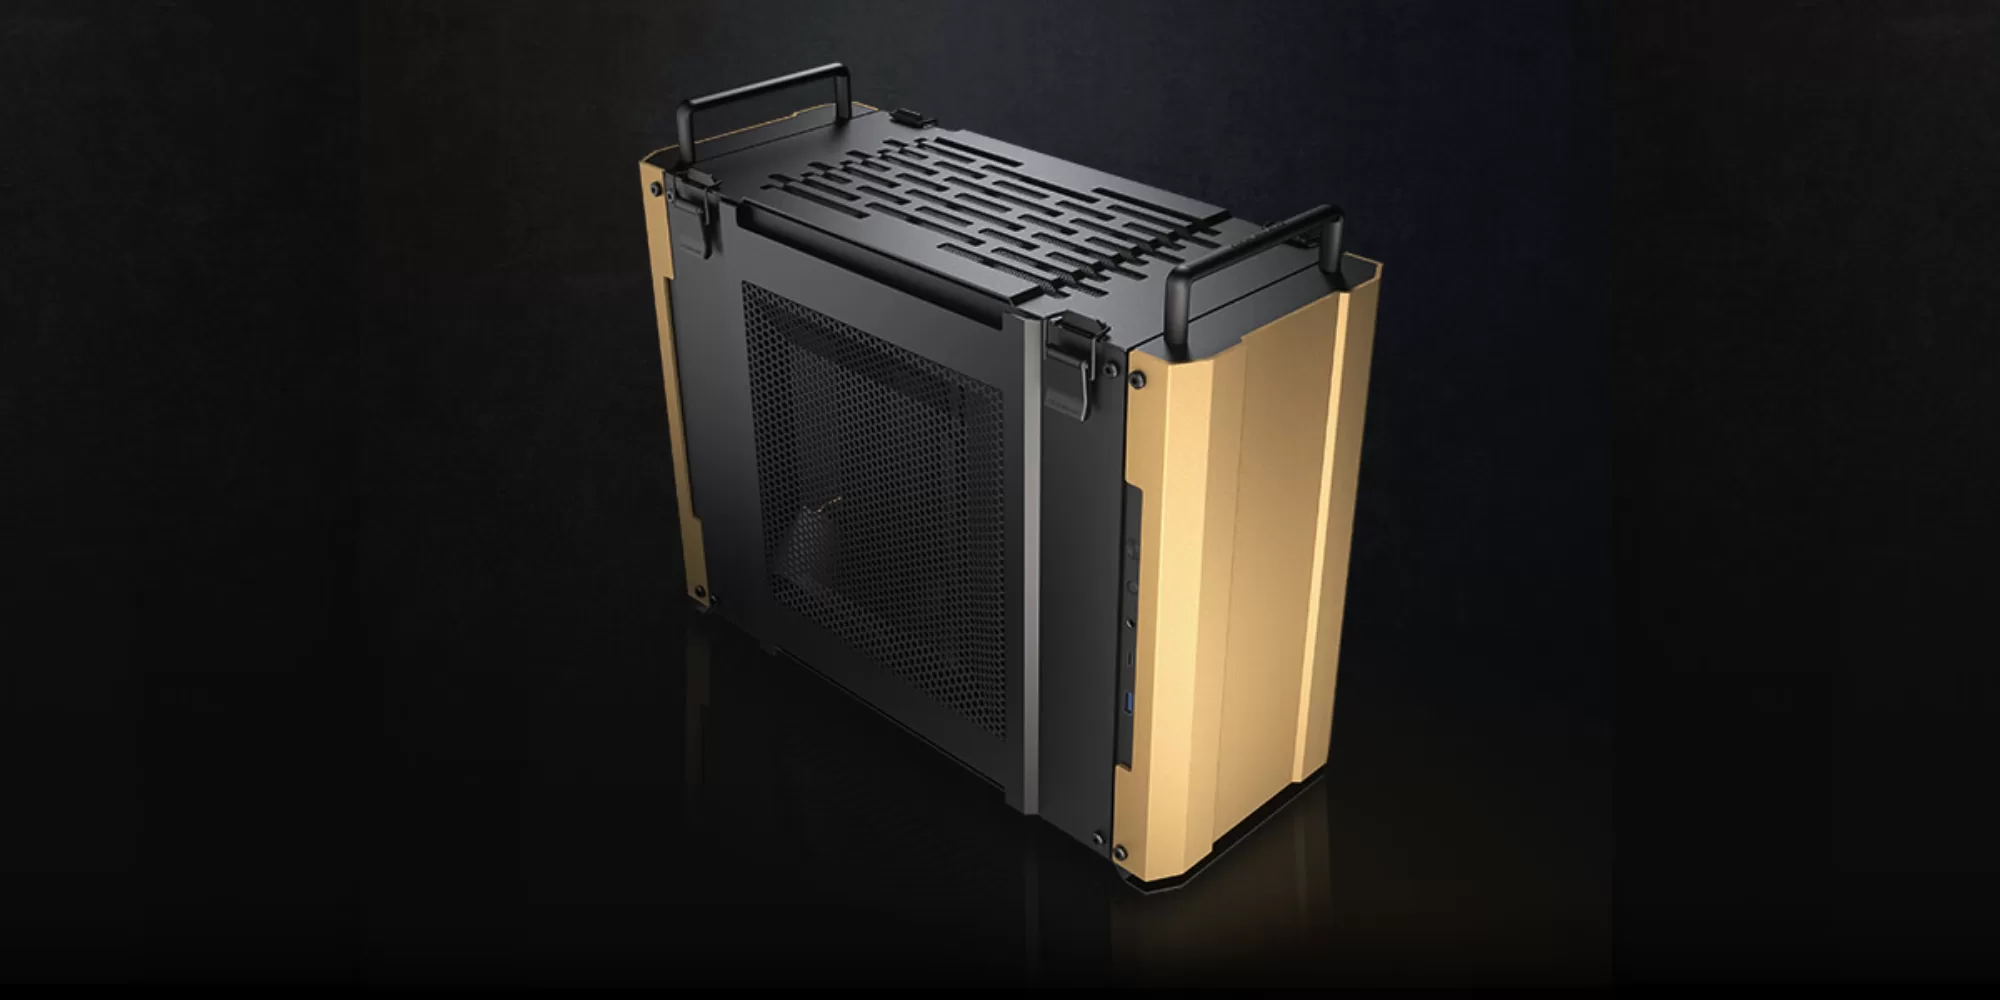 COUGAR launches its military inspired Dust 2 Mini-ITX case